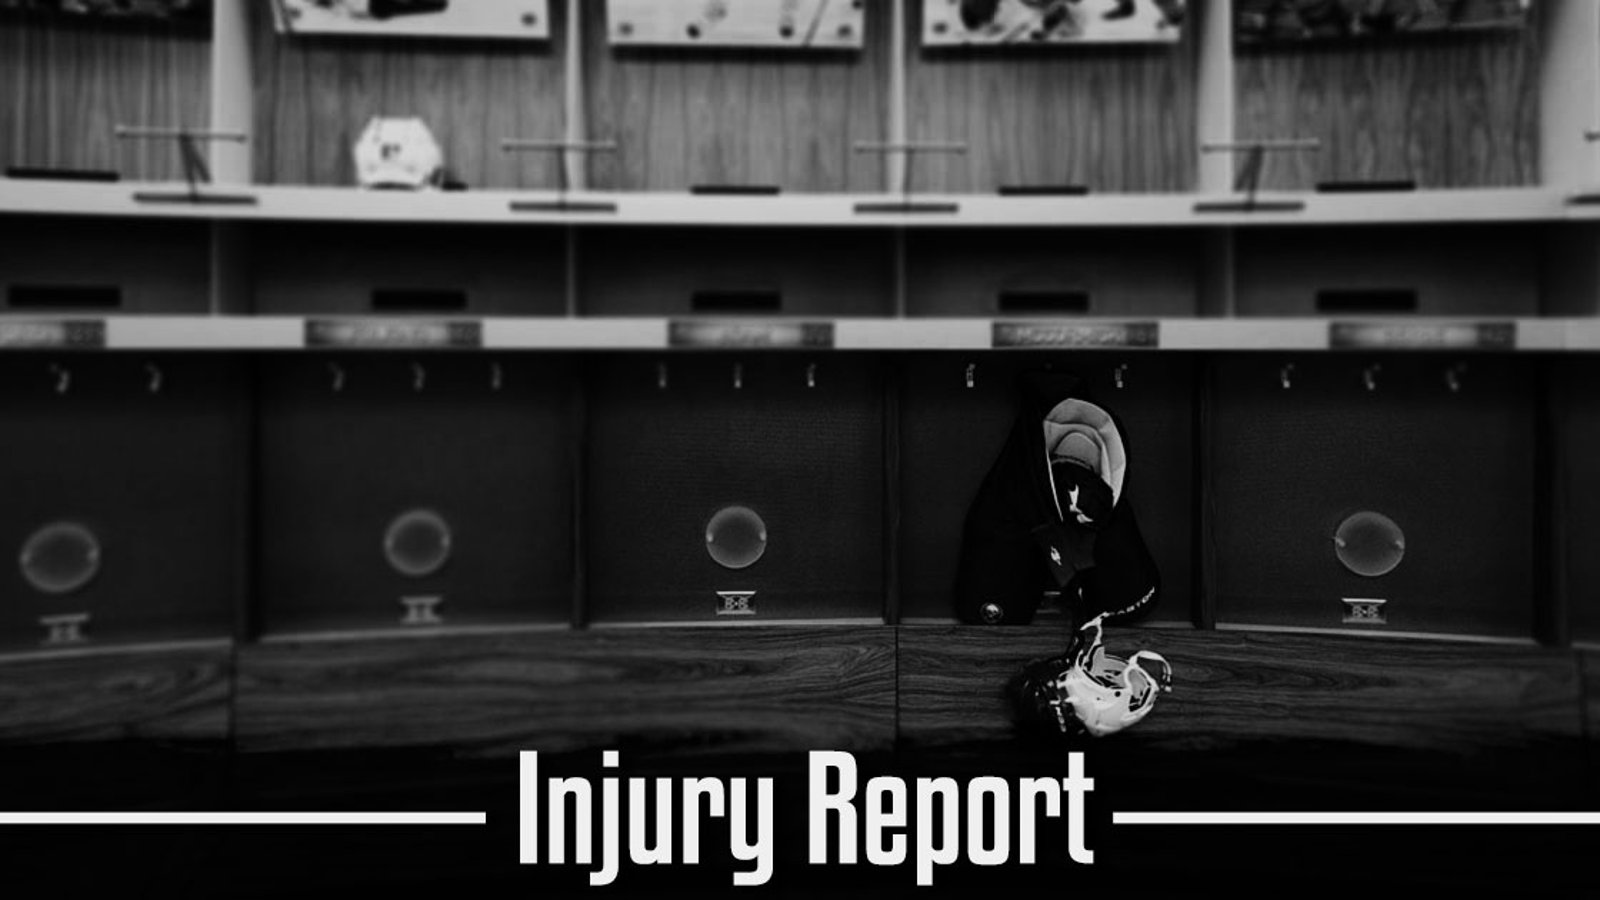 Injury Report : Team captain could be back tonight